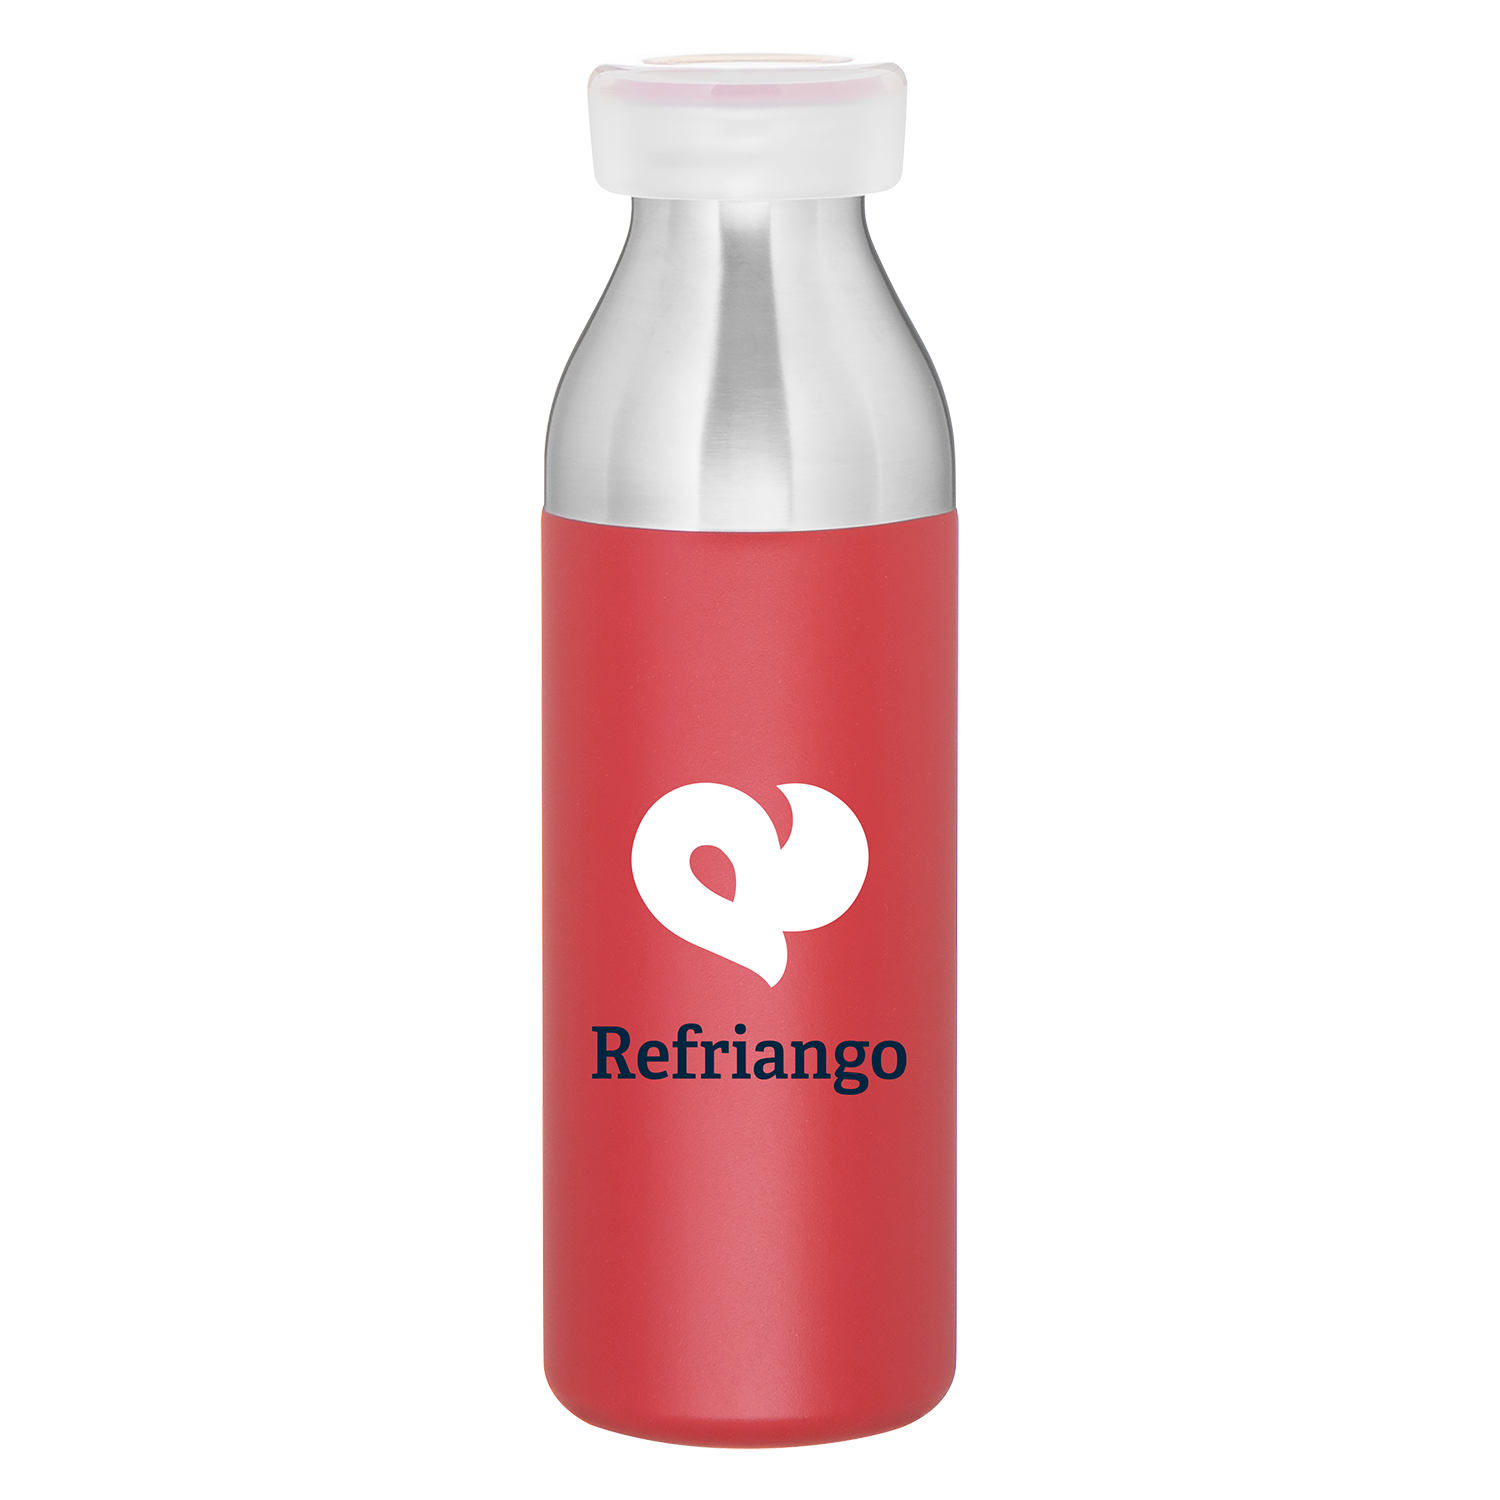 Custom Neoprene Zipper Bottle Suit Coolers from 179.25 at Great Online  Promotions. Get more at Great Online Promotions